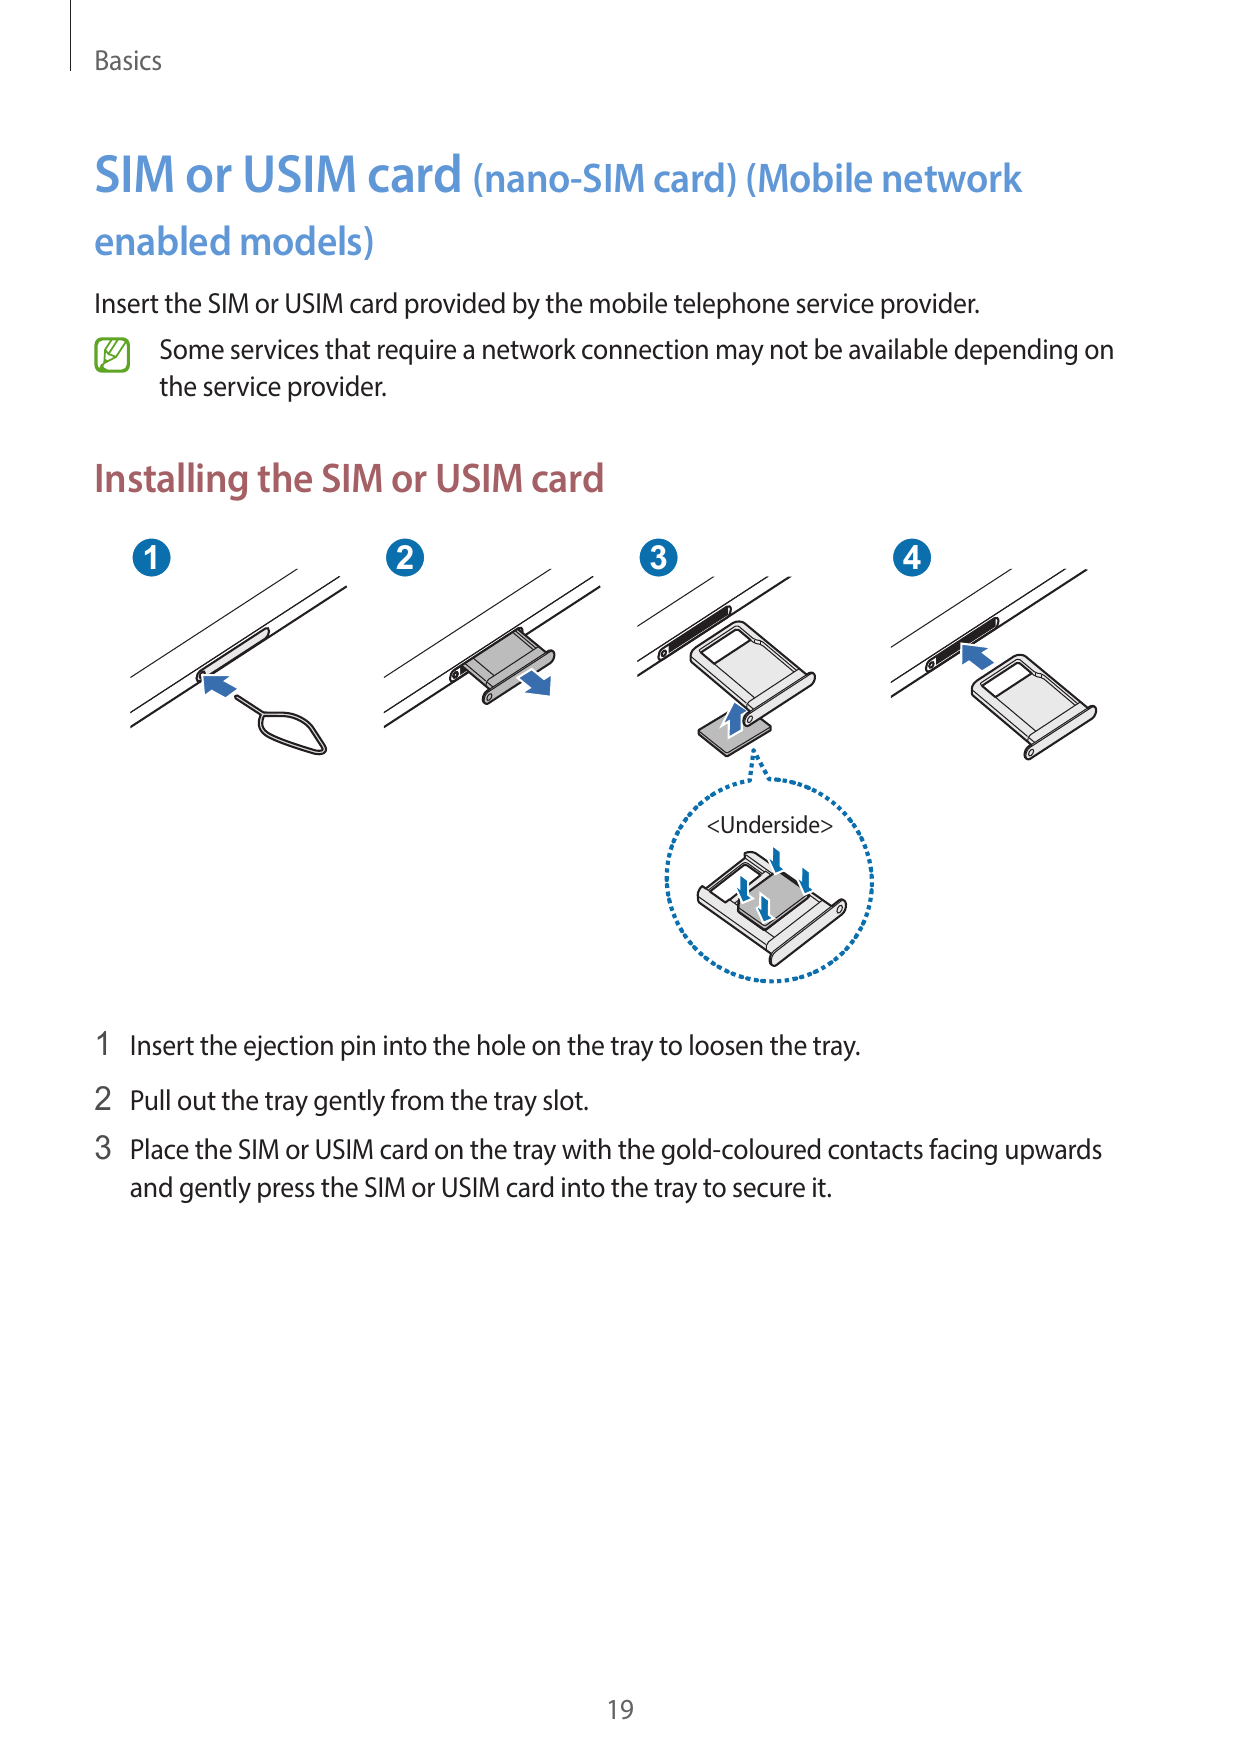 BasicsSIM or USIM card (nano-SIM card) (Mobile networkenabled models)Insert the SIM or USIM card provided by the mobile telephon